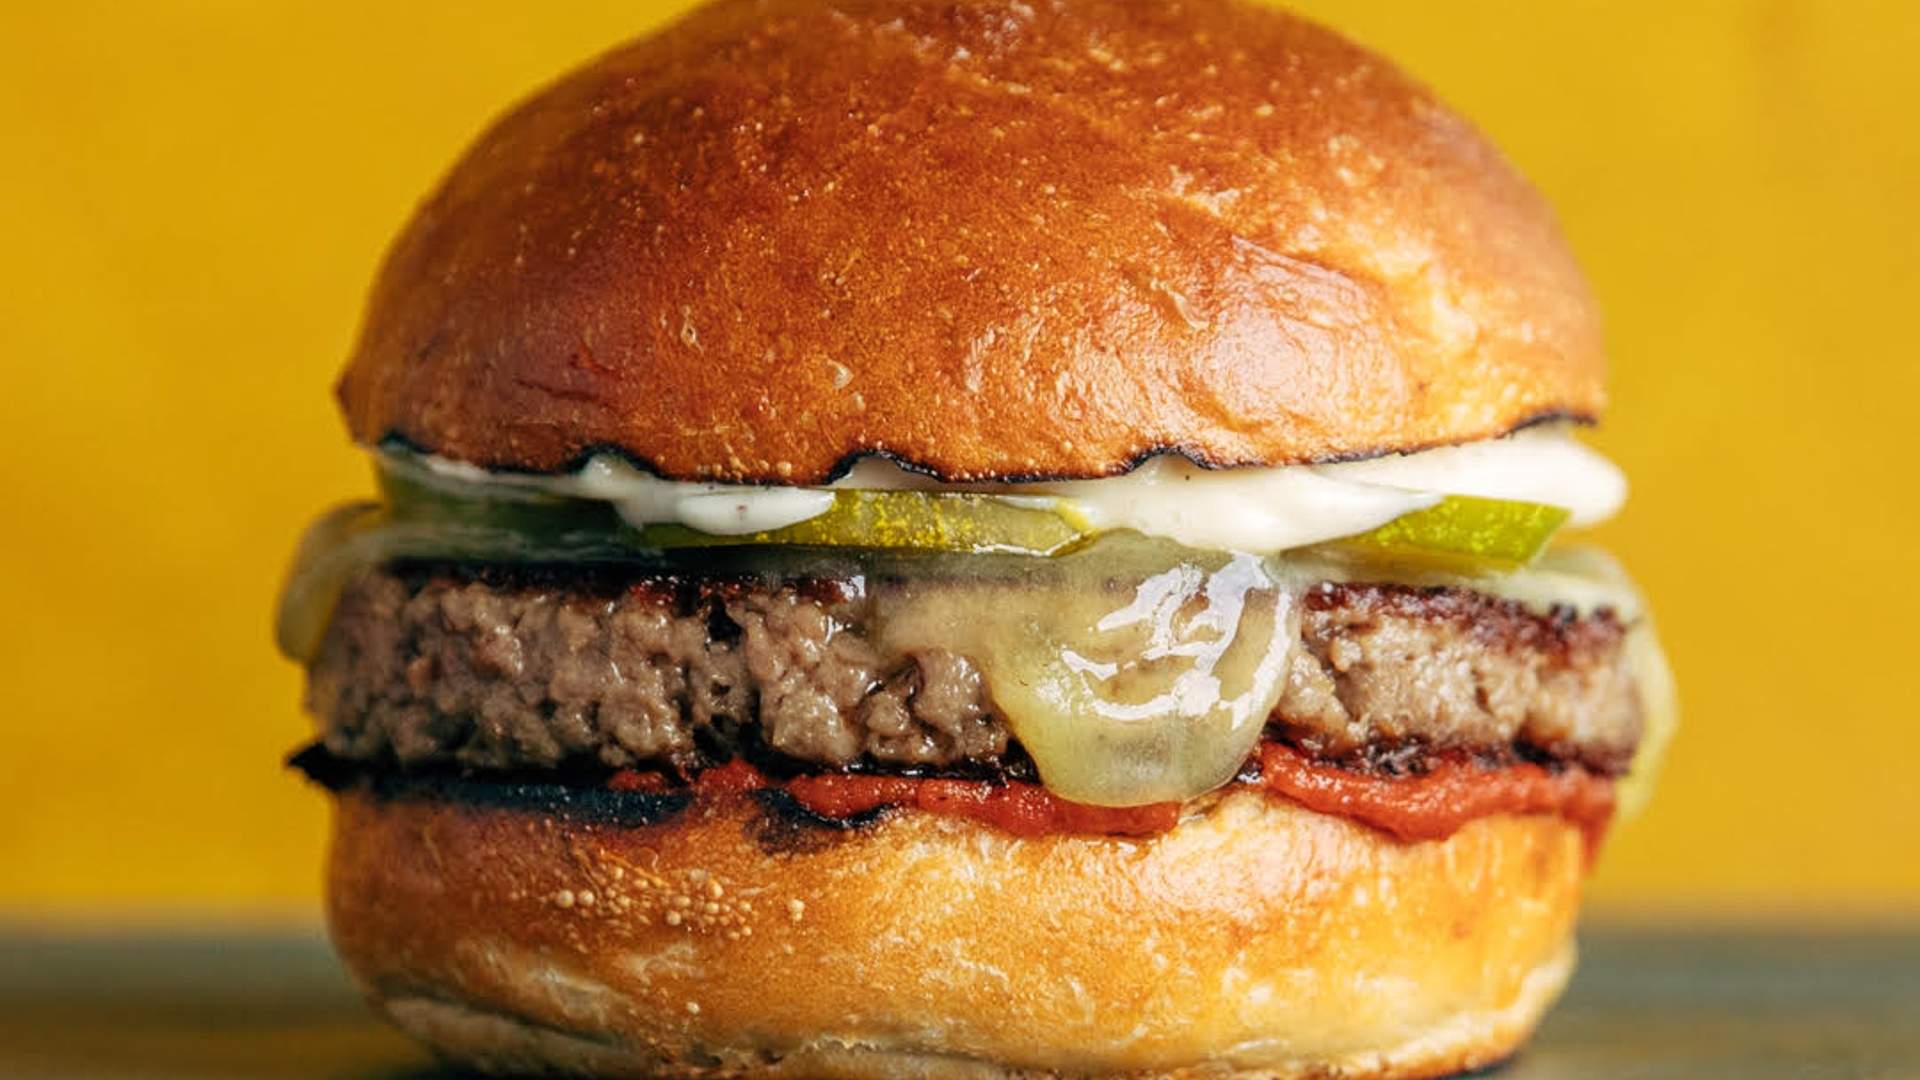 Impossible Foods Is Finally Serving Up Its Plant-Based Beef Alternative in New Zealand